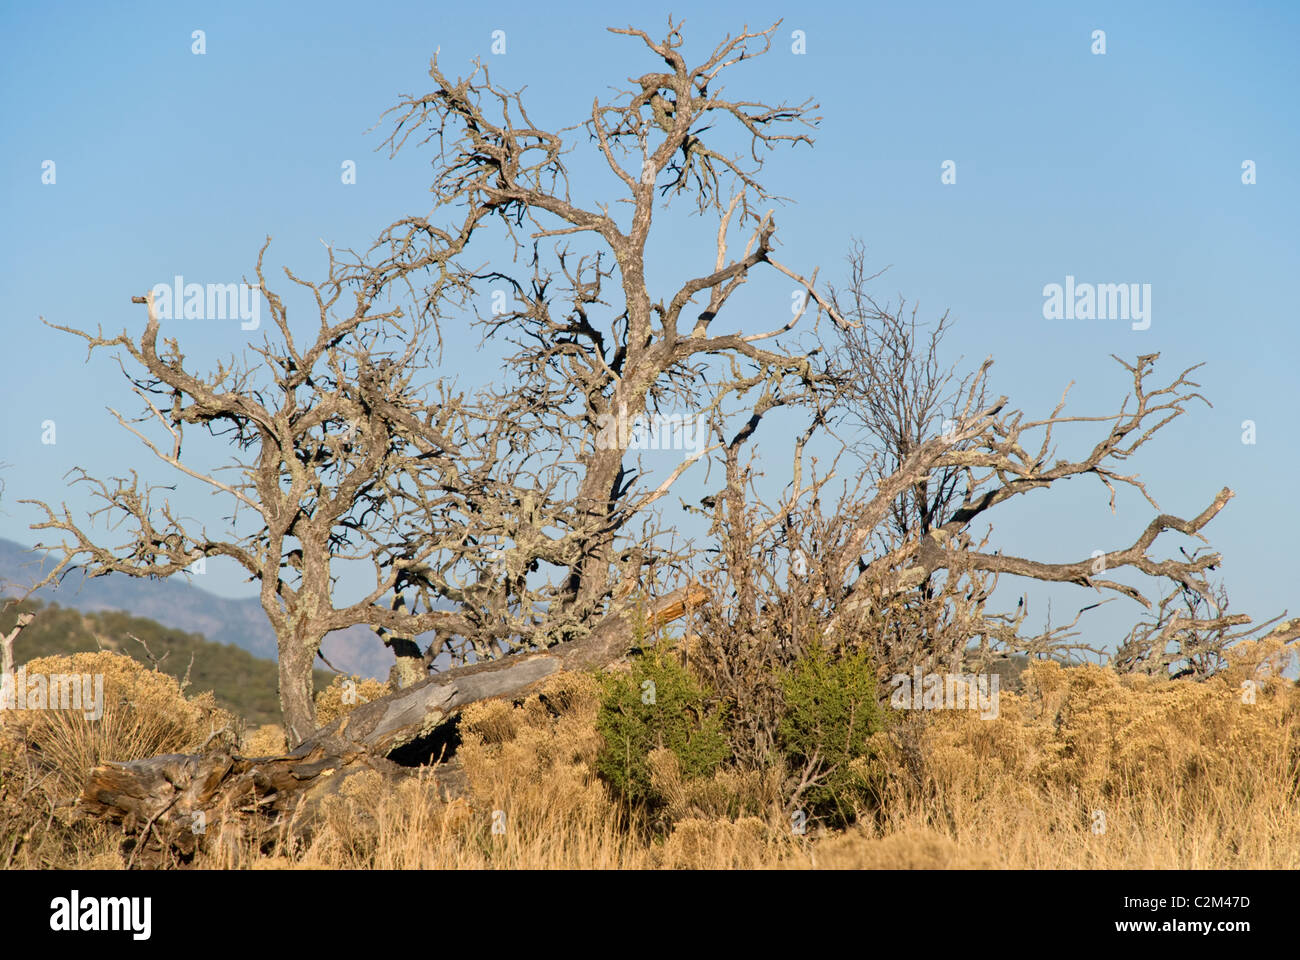 The evening sun casts bright light on dry vegetation in southern New Mexico. Stock Photo